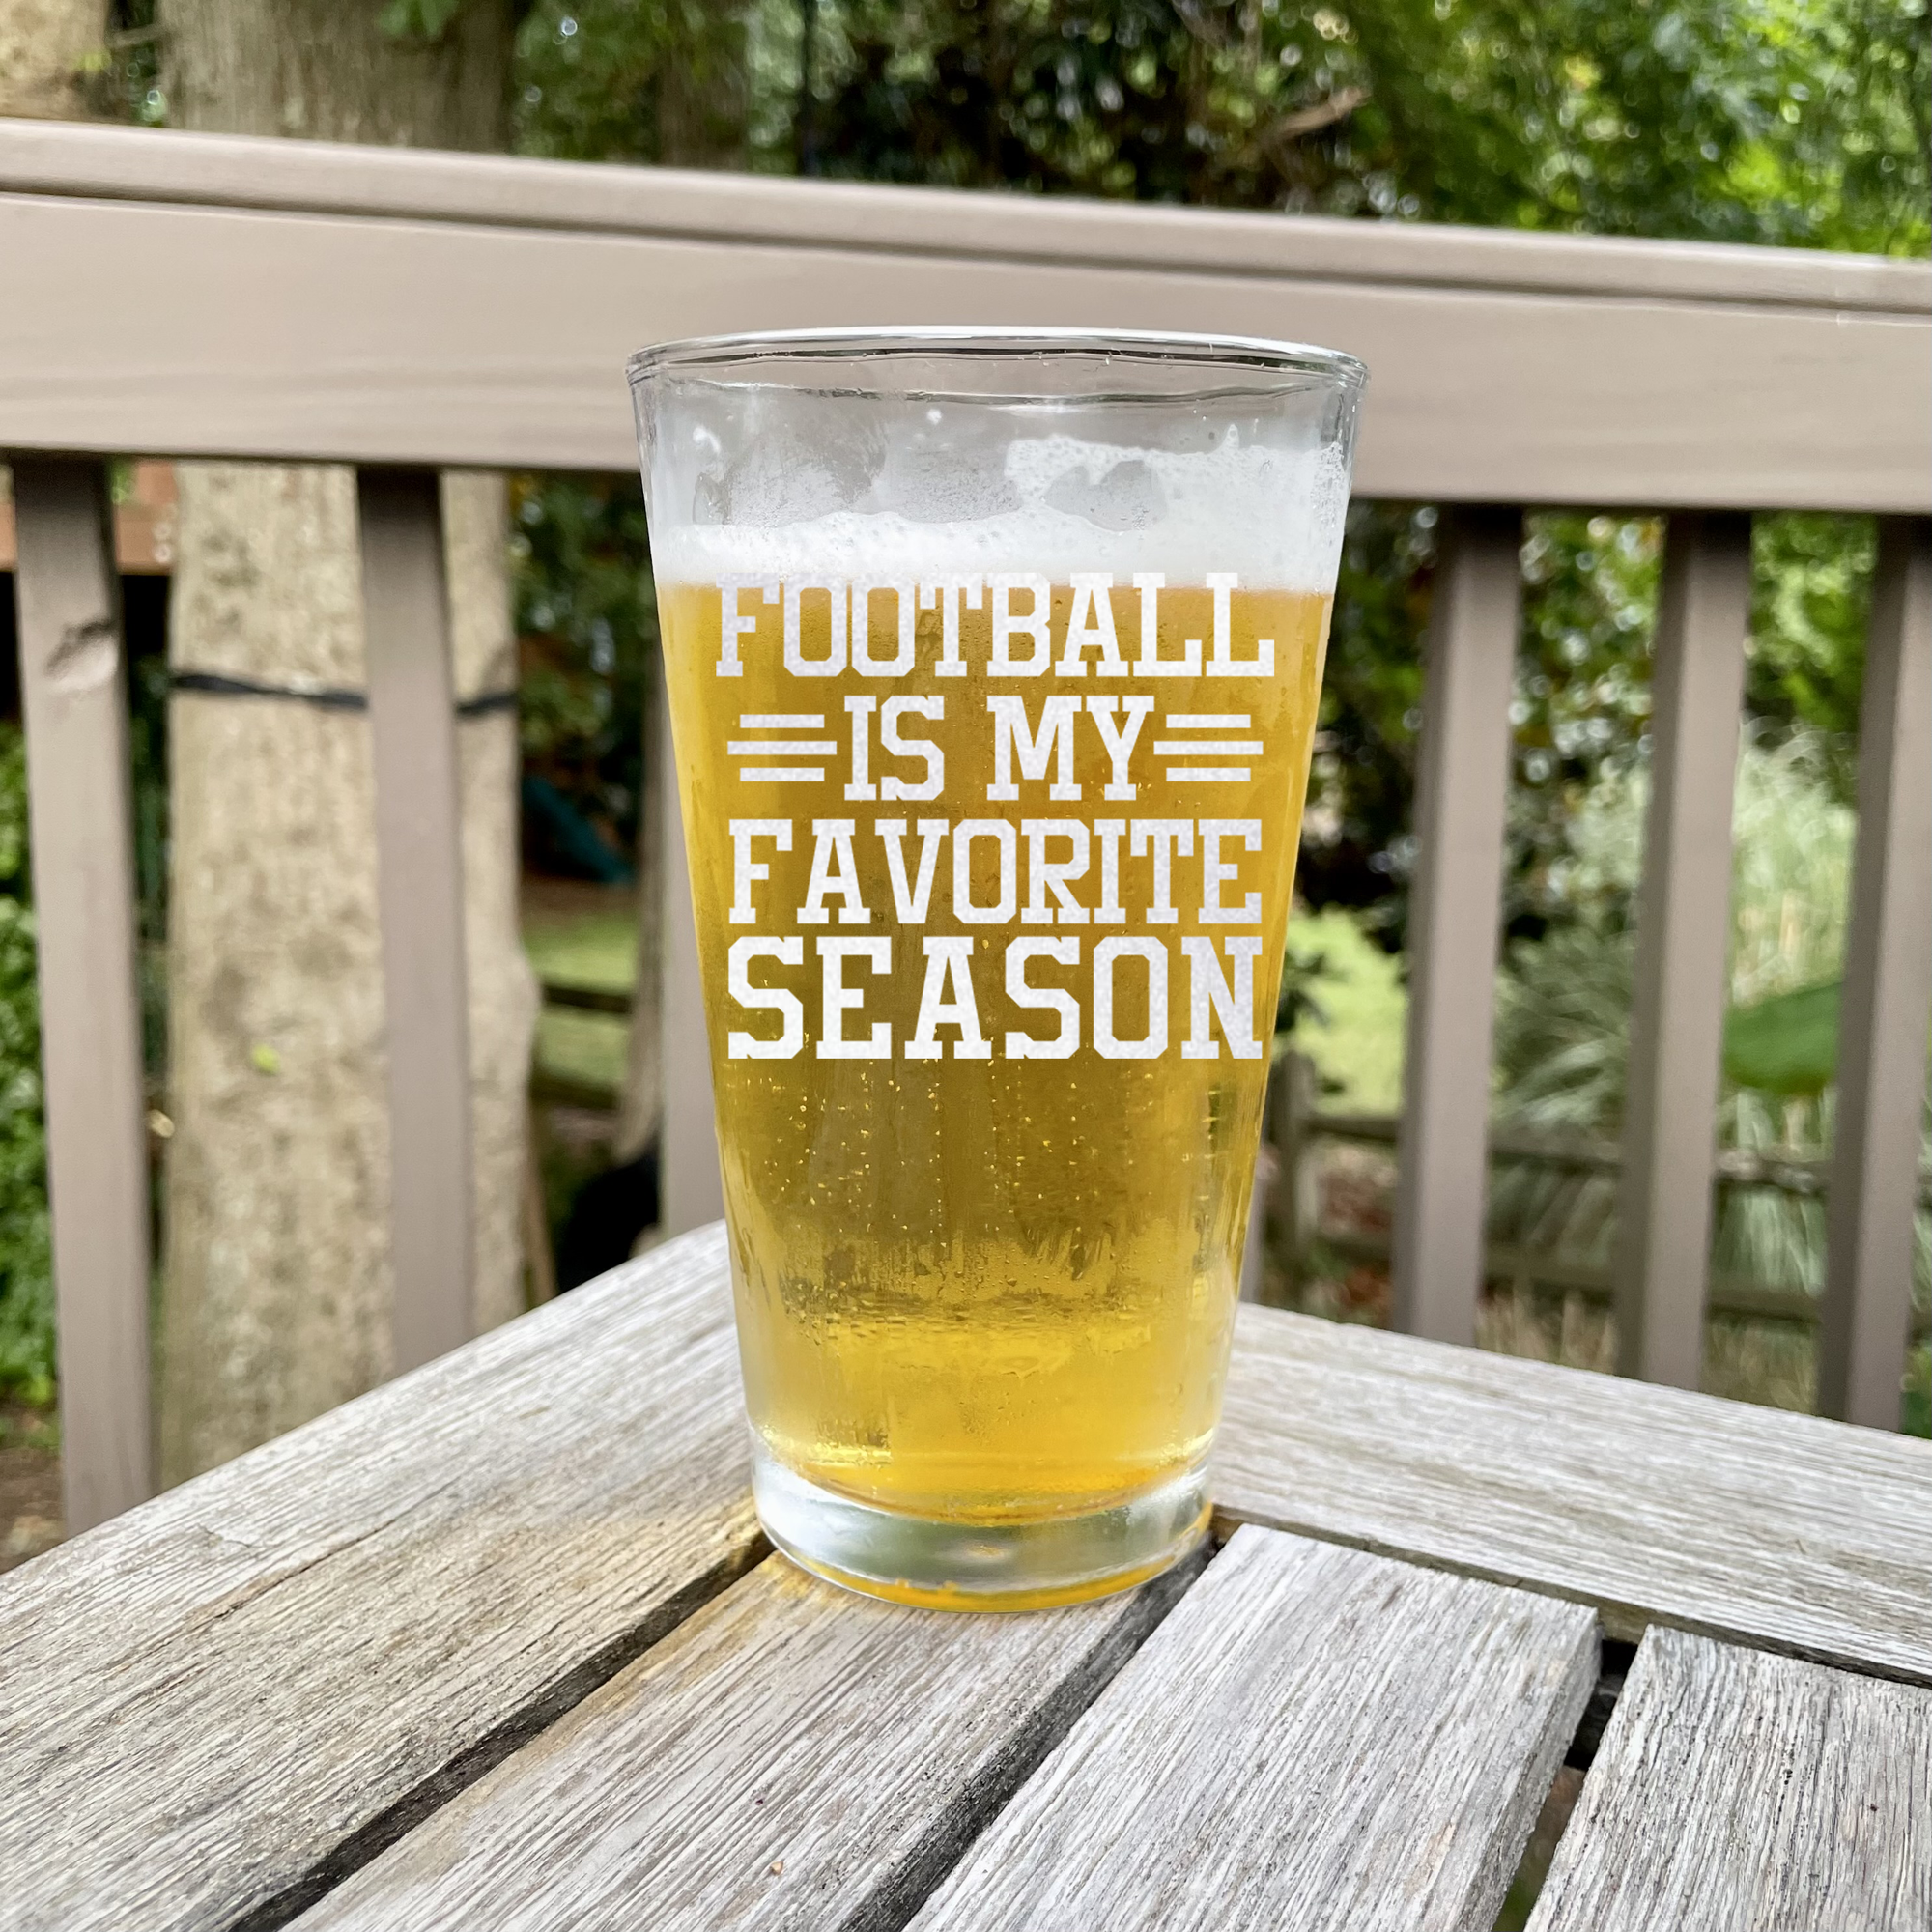 Seasons Of Tackles And Touchdowns Pint Glass